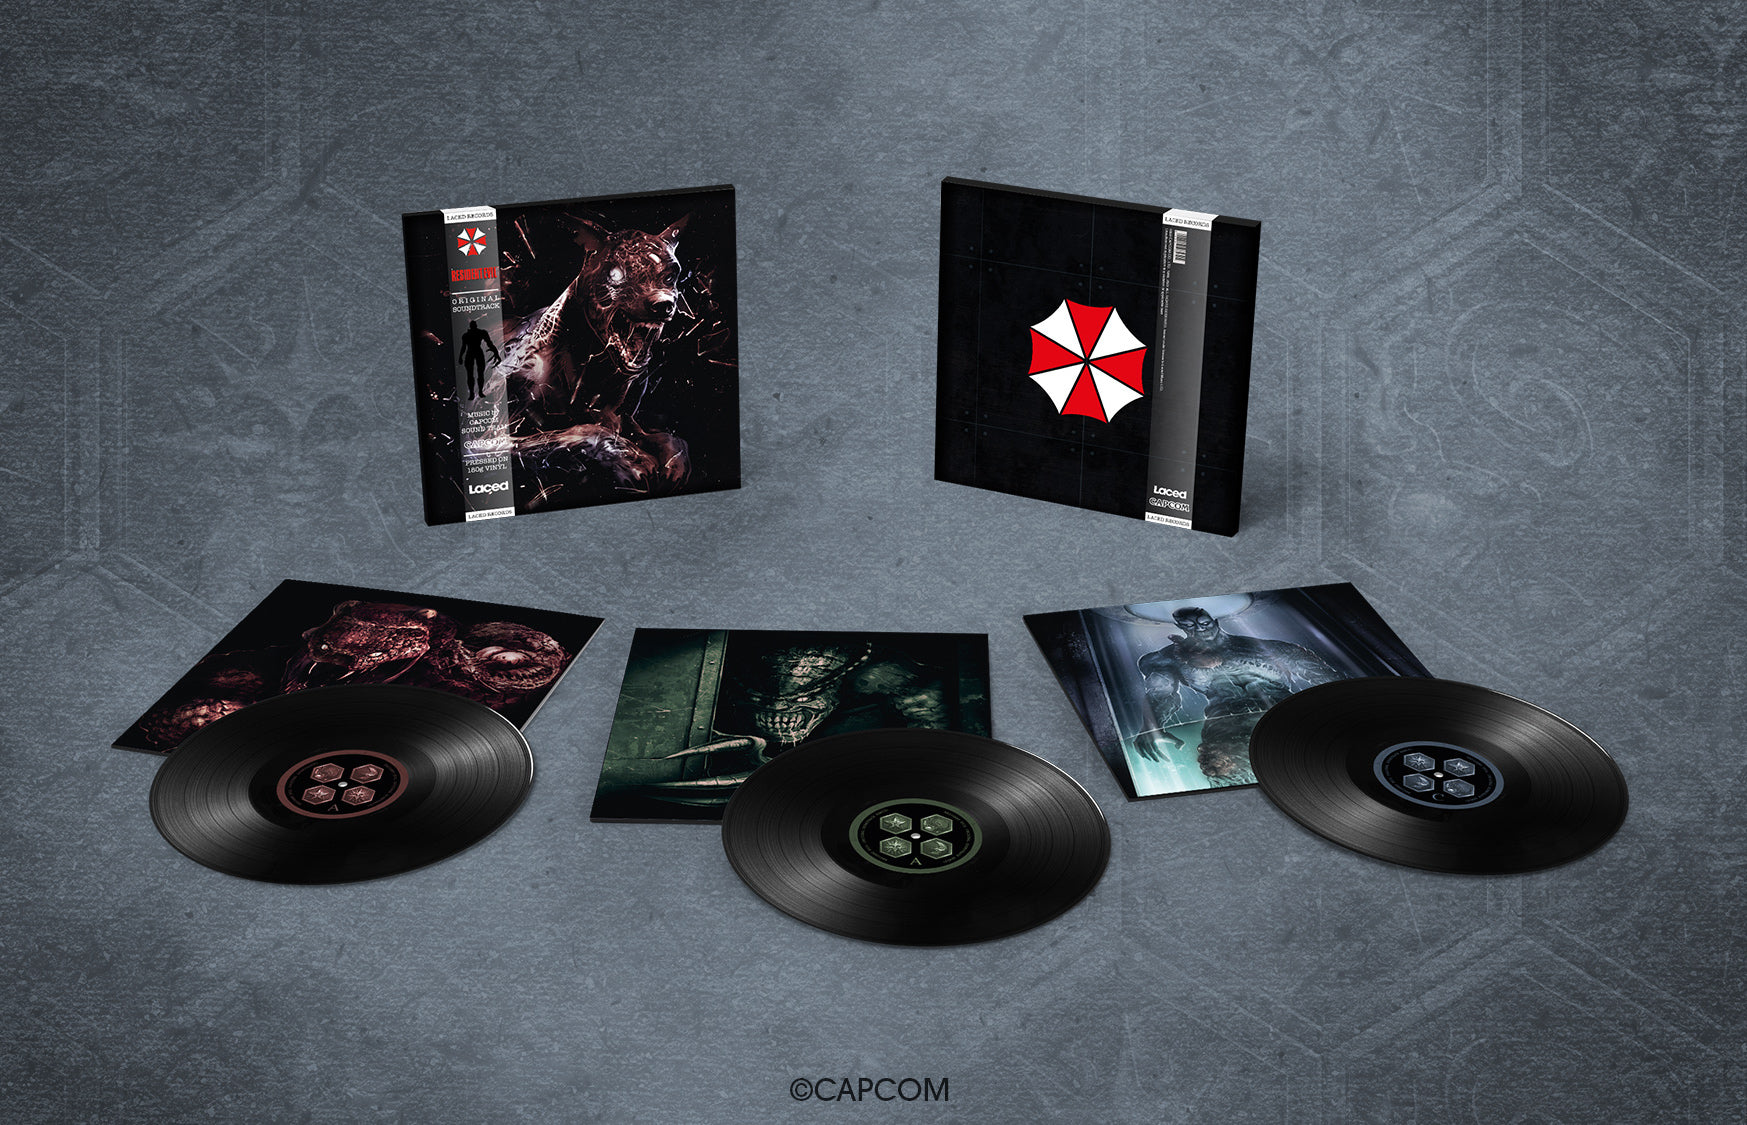 Vampire: The Masquerade – Bloodhunt (Deluxe Double Vinyl) – Laced